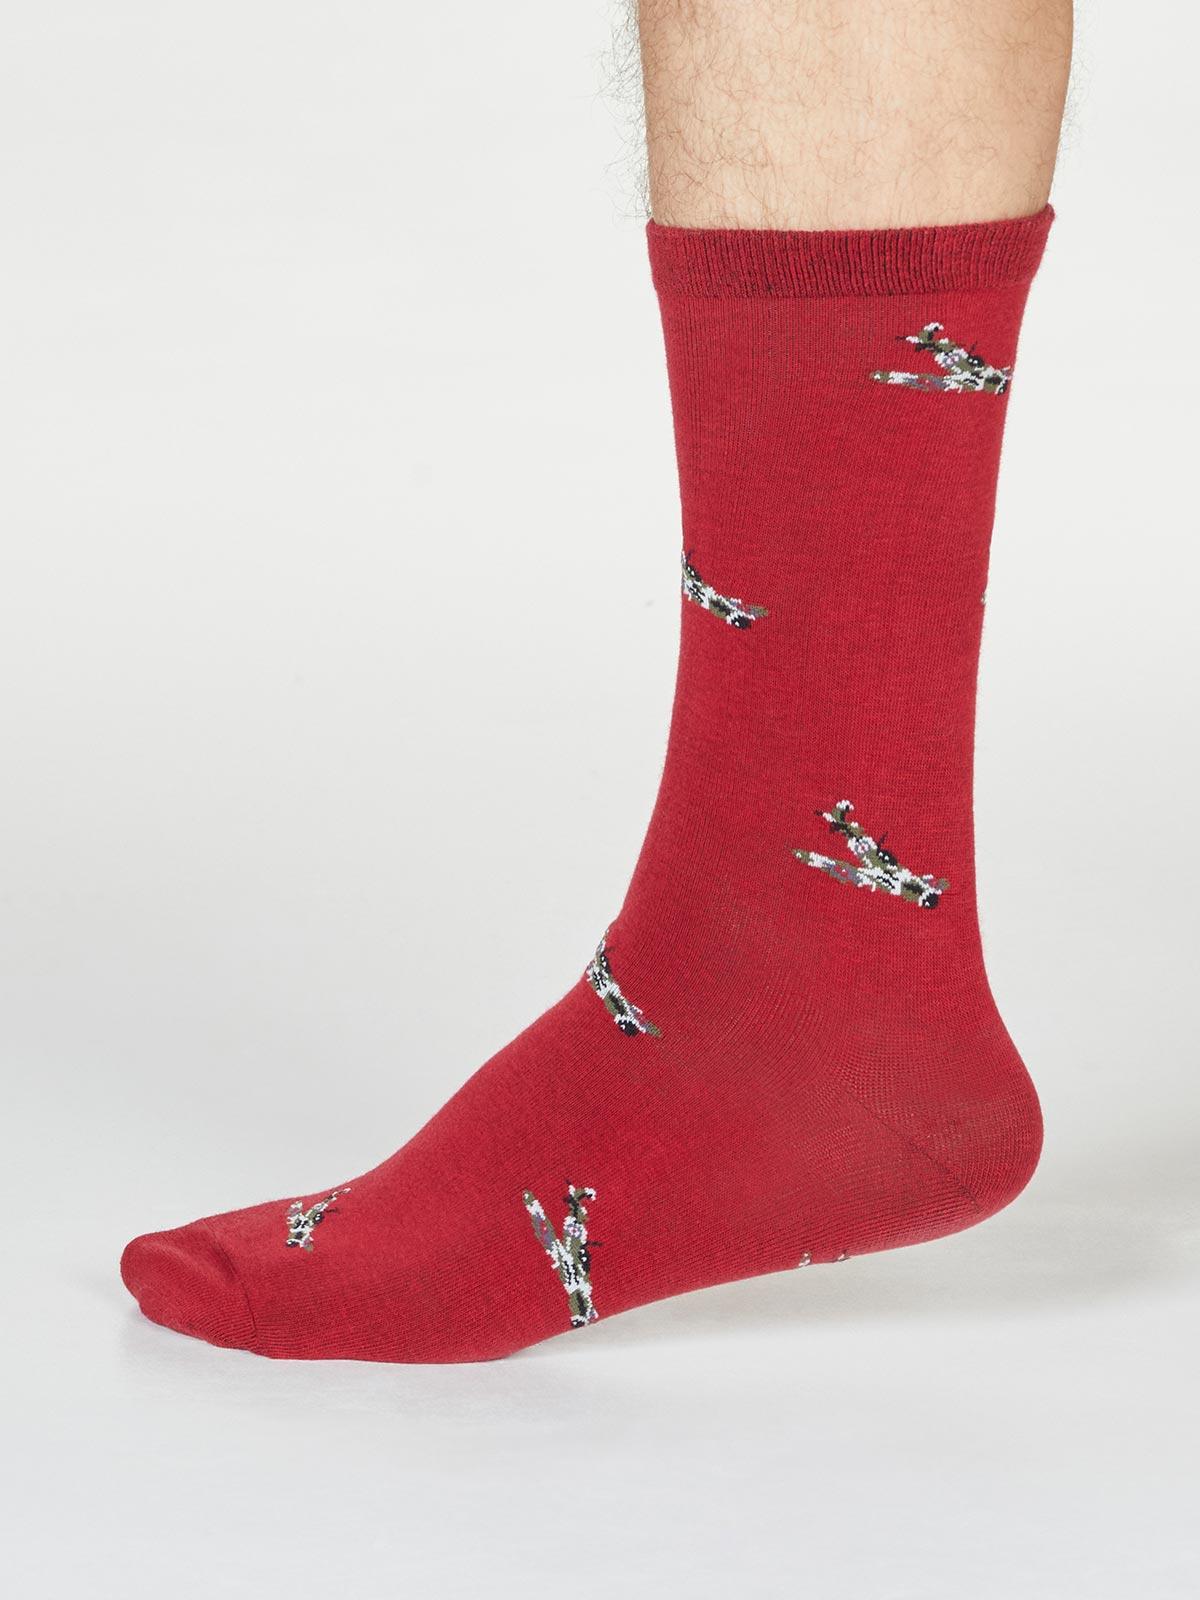 Judron Spitfire Socks - Pillarbox Red - Thought Clothing UK